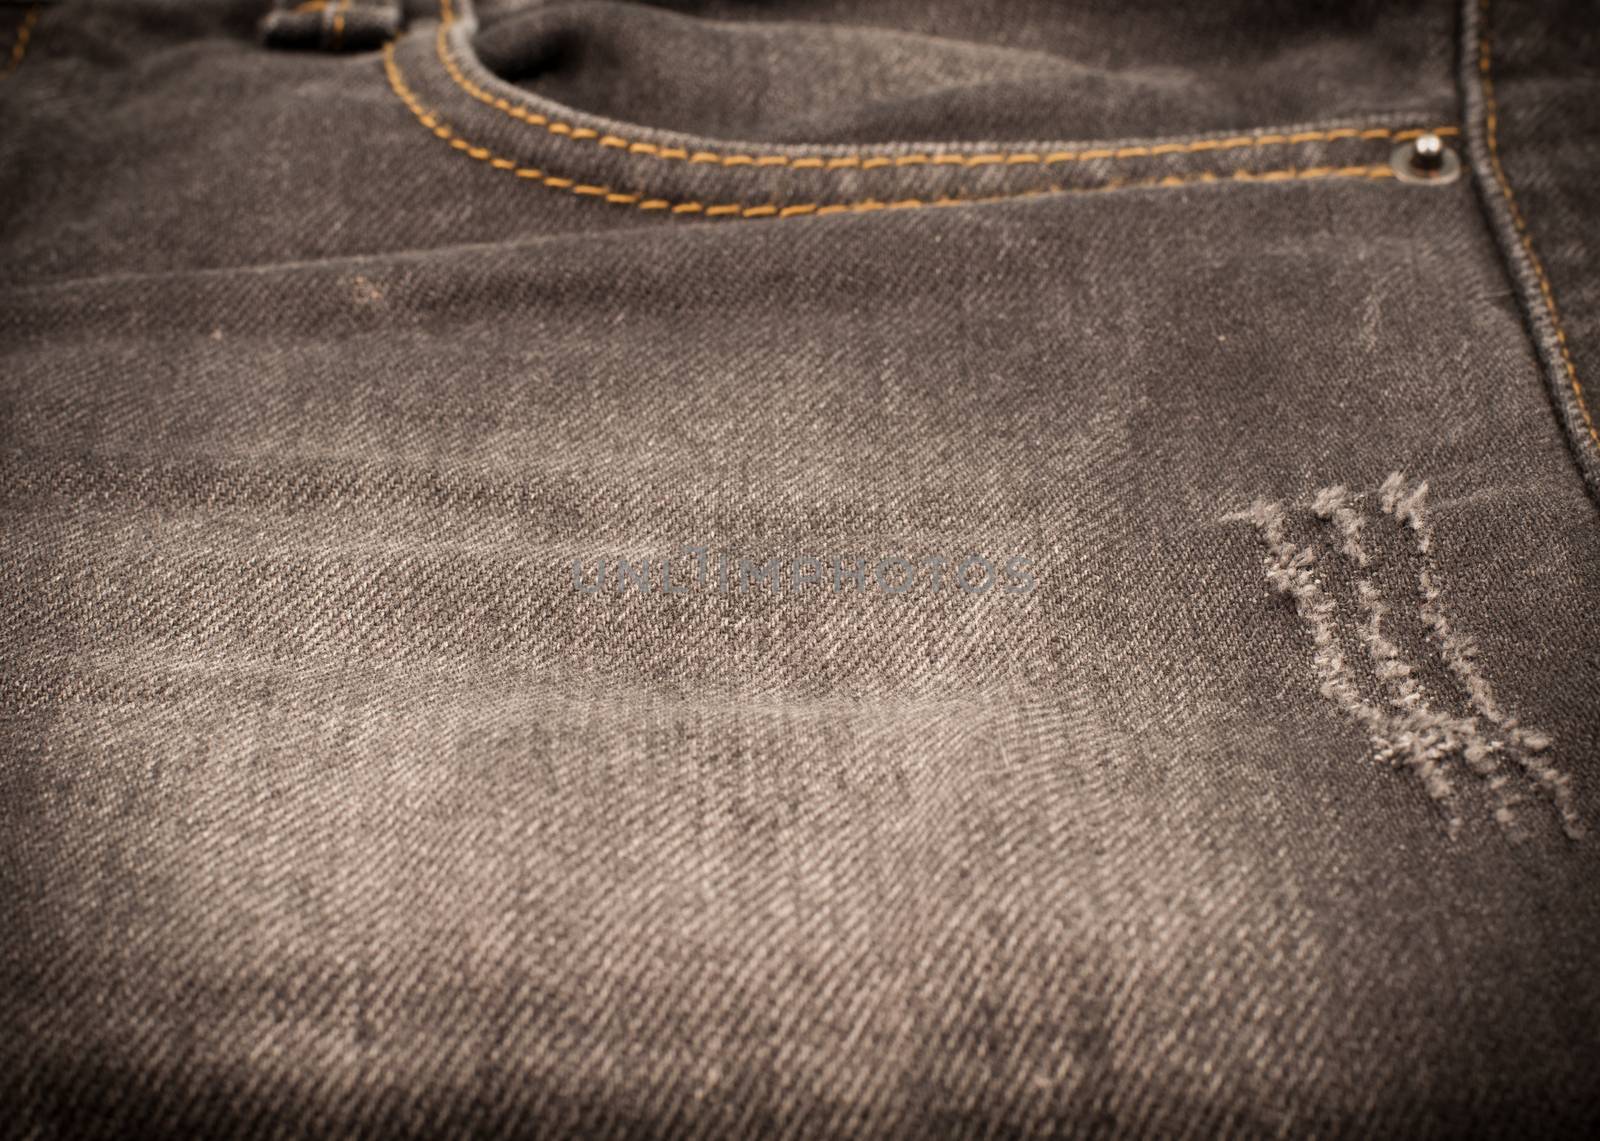 Close up denim jeans texture and background